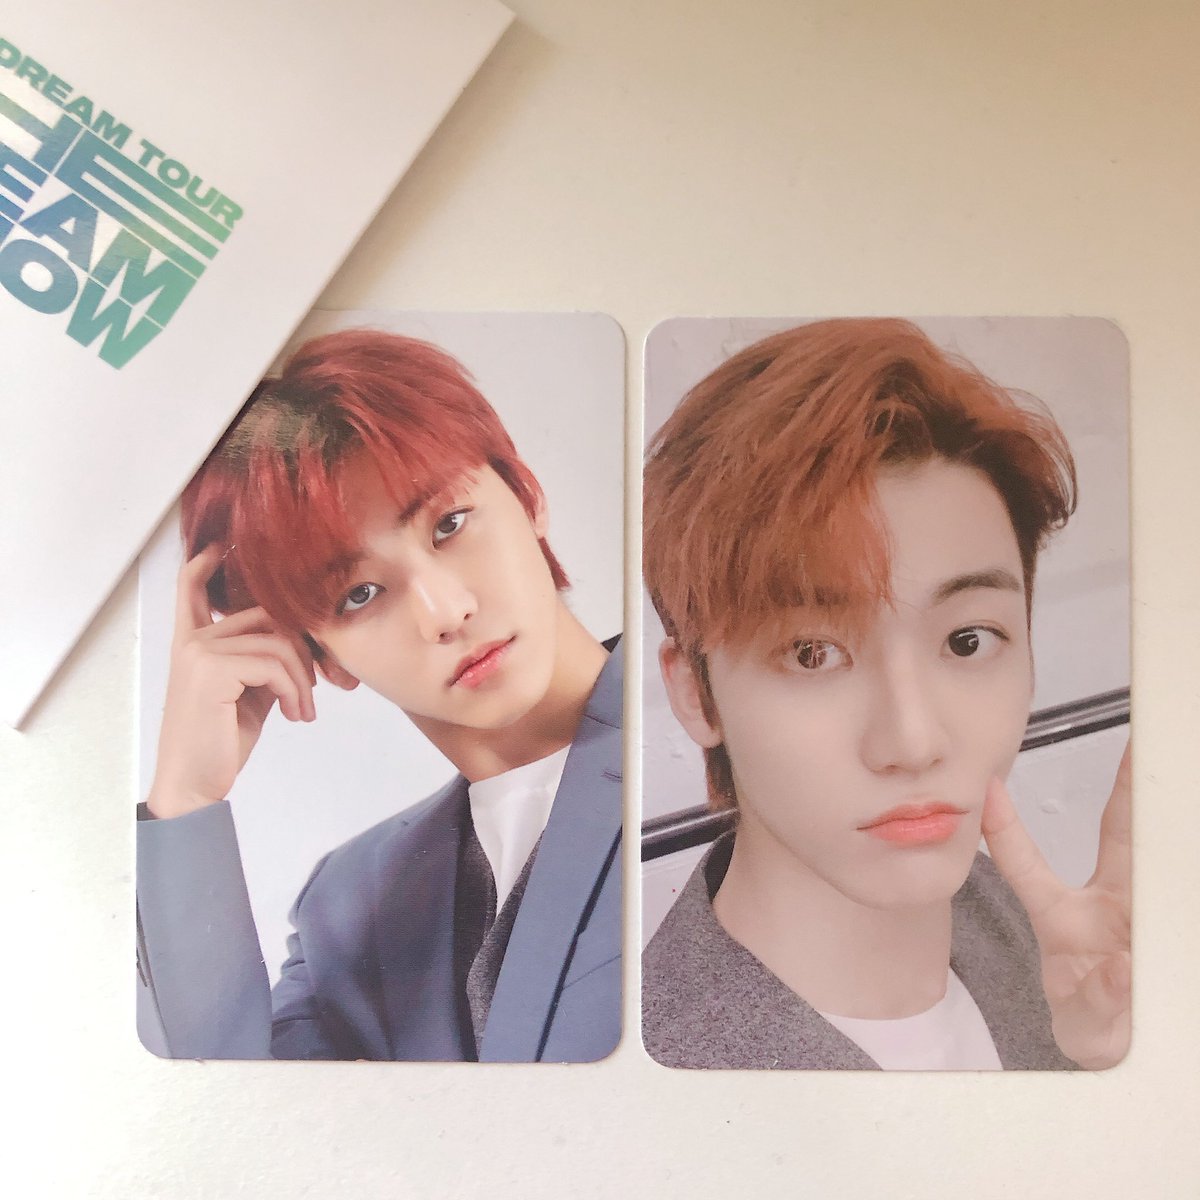 these were the two tds fortune pcs i was missing and i’m so happy they’re complete now  thank you  @sunburst_jaemin for the smooth transaction   #SunburstJaeminFeedback